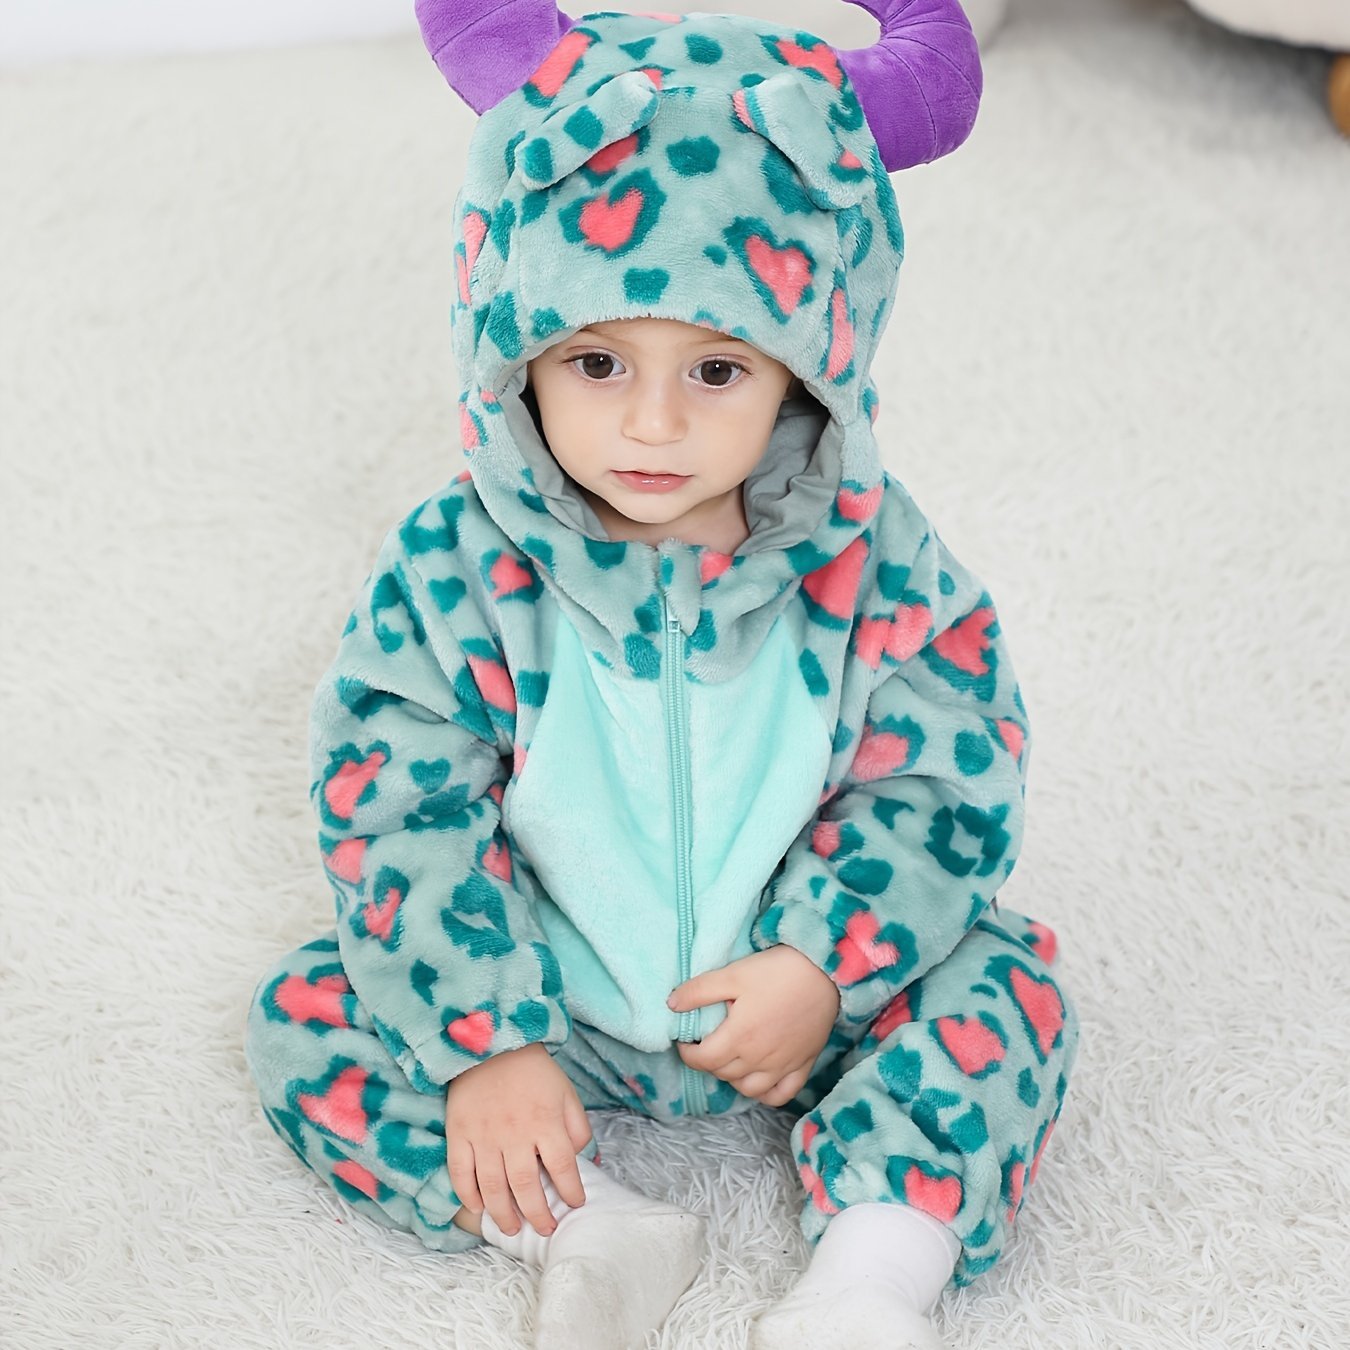 Adorable Little Monster Hooded Bodysuit - Soft, Warm & Easy - On Zip for Toddler Babies - Perfect Single Layer Cosplay Jumpsuit for Parties & Halloween - Ammpoure Wellbeing